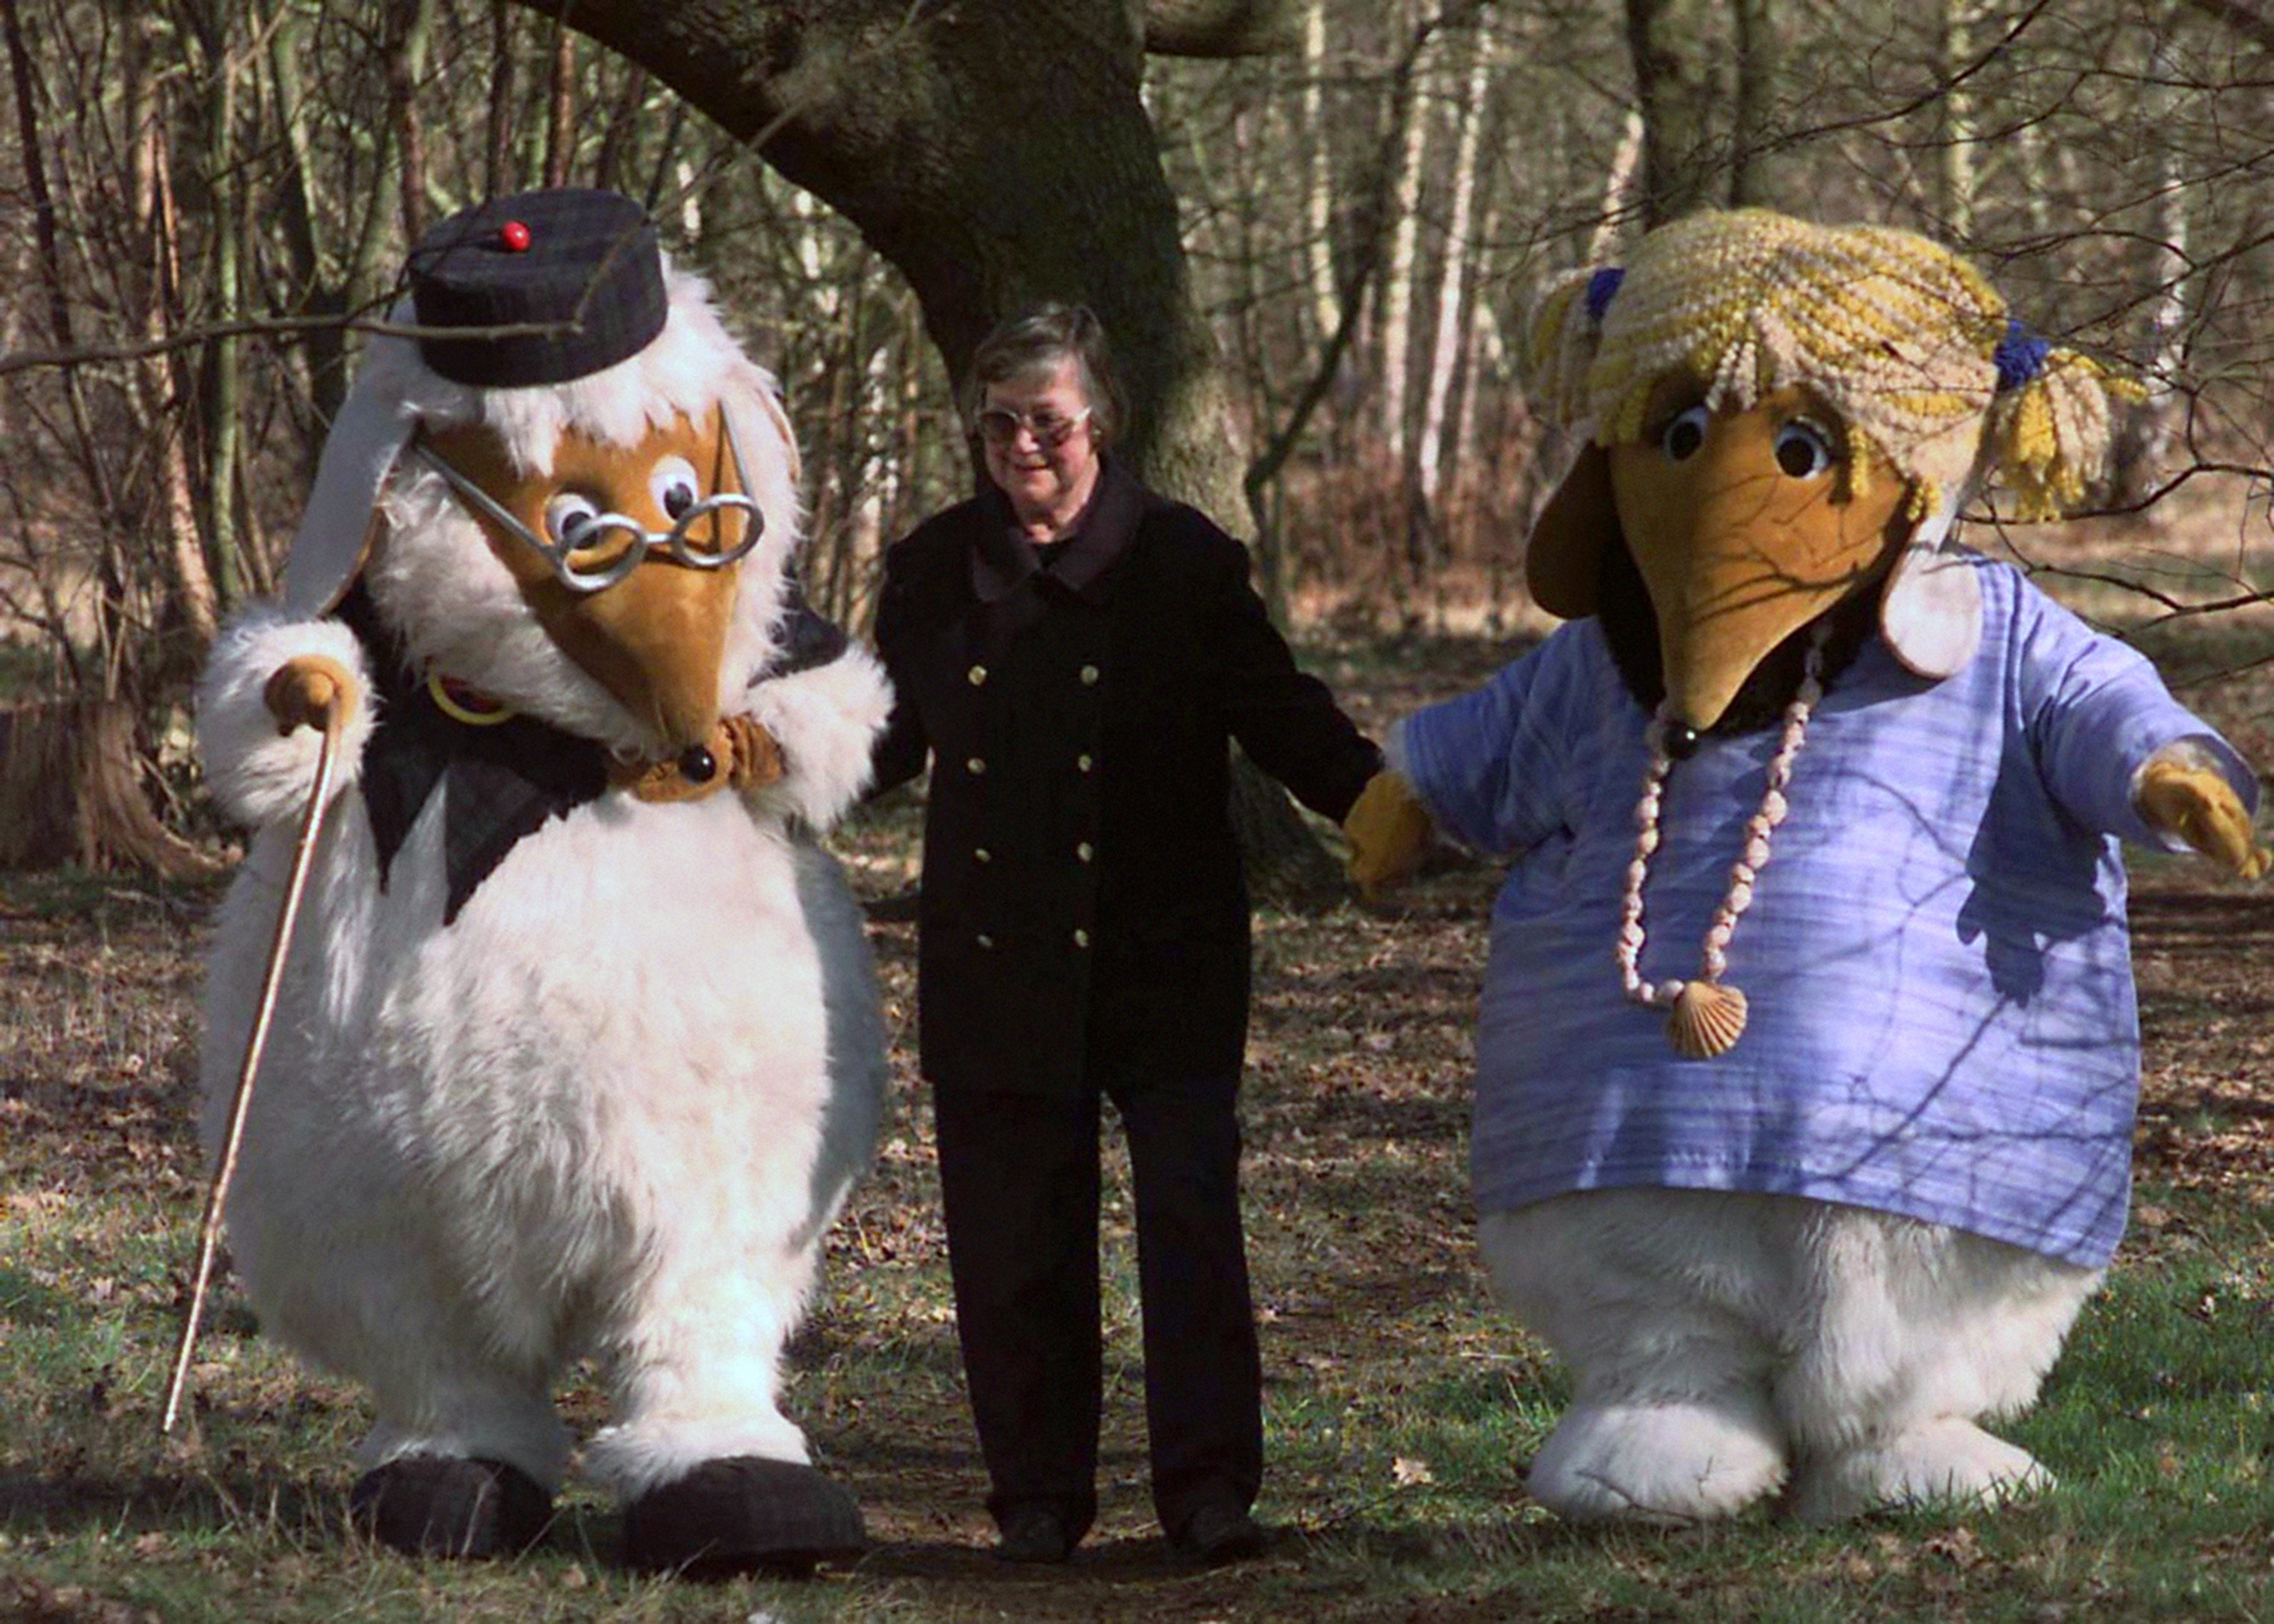 The name and concept for ‘The Wombles’ was born out of an accident rather than design, said creator Elisabeth Beresford